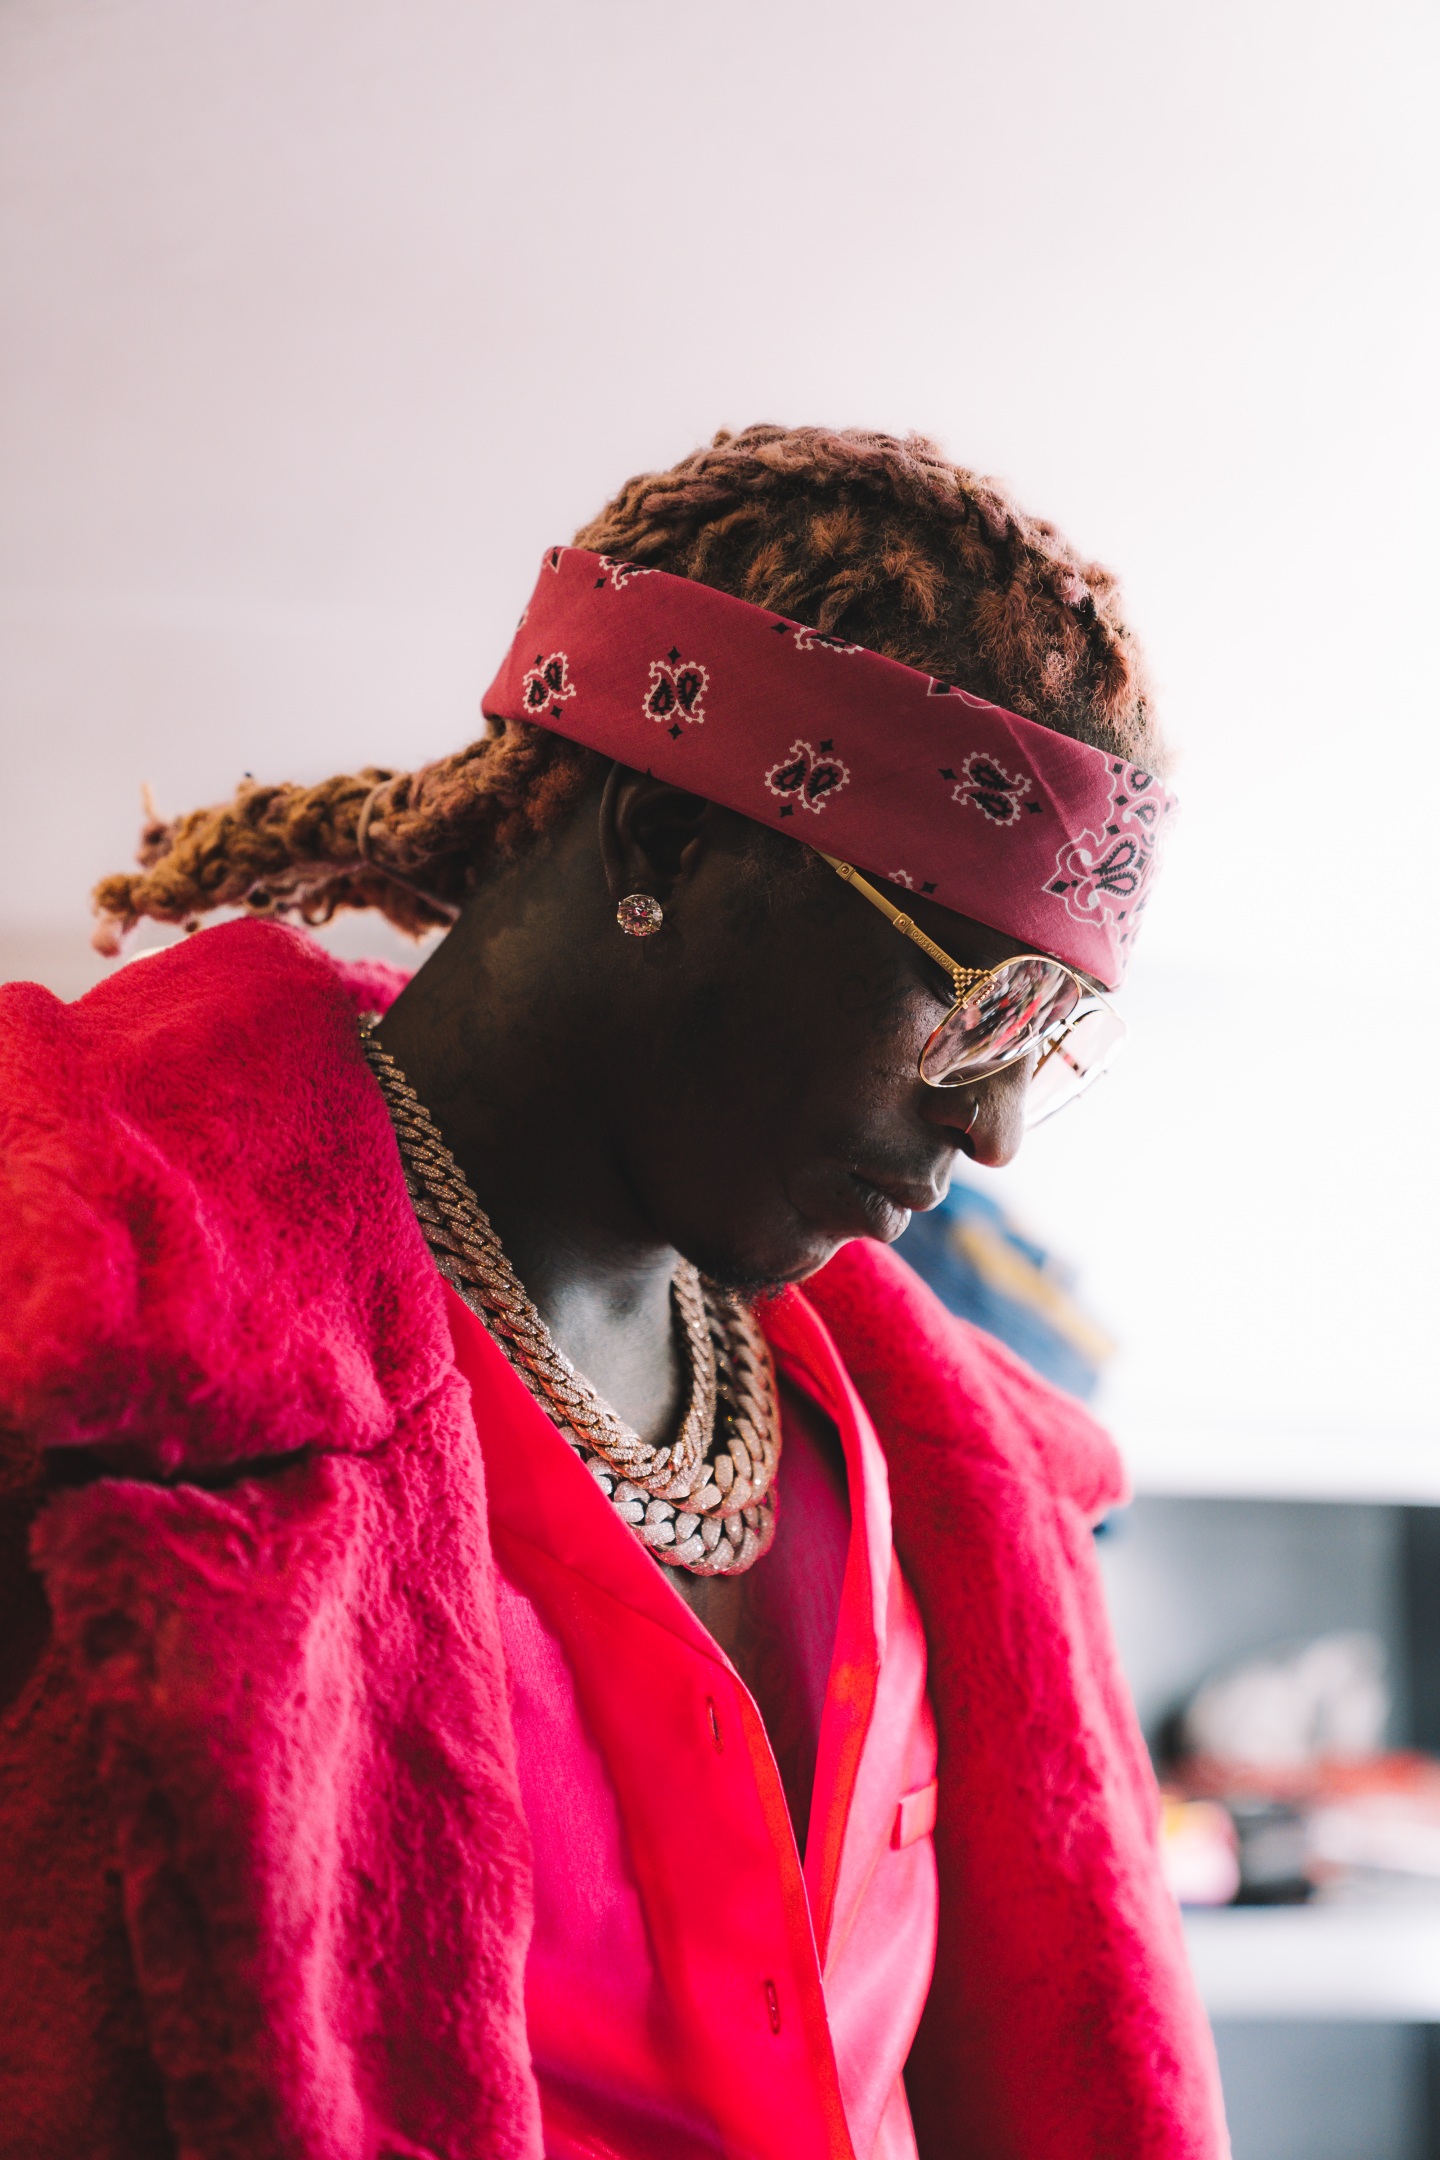 Young Thug’s prosecutors are using his lyrics against him. Where’s the free speech brigade?